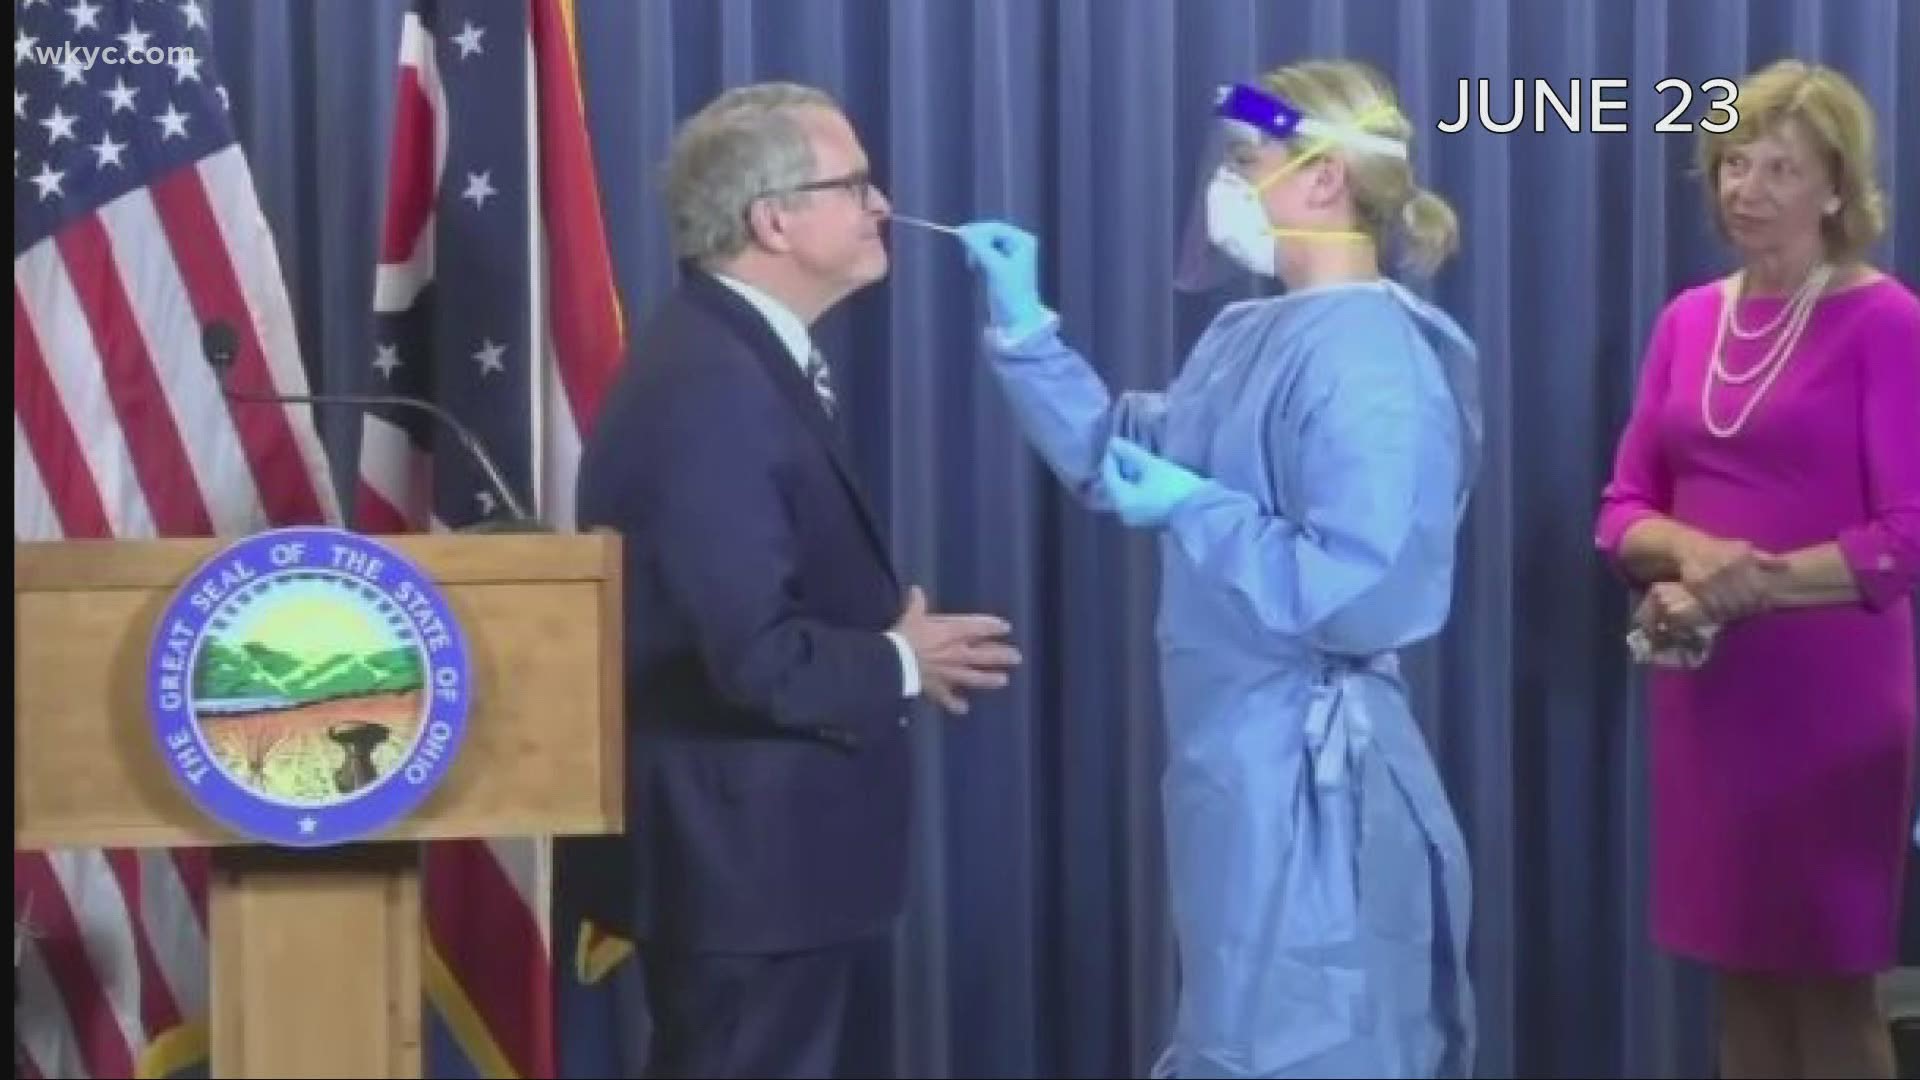 How did one test show Ohio Gov. Mike DeWine was positive for COVID-19, and another a few hours later show he was negative? Here's what we know about the tests.